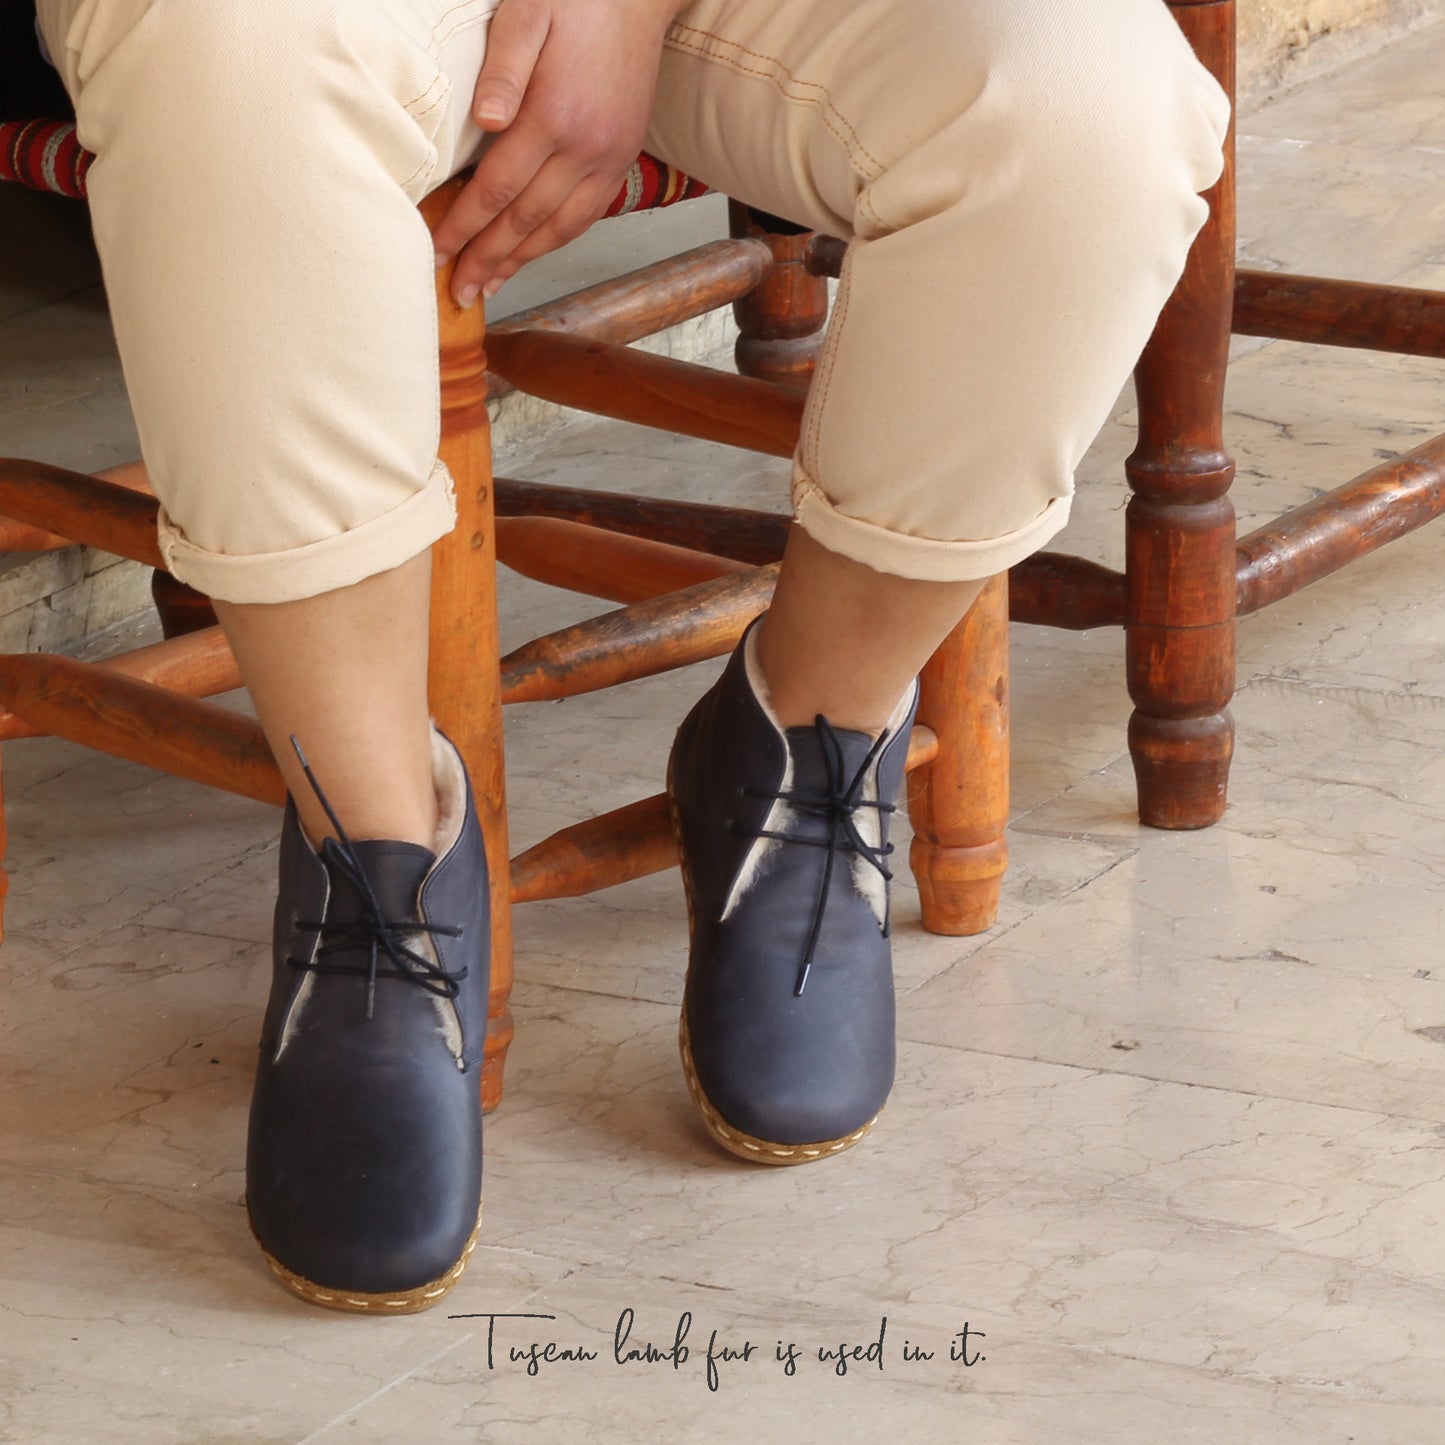 Shearling Oxford Ankle Barefoot Boots - Navy Blue - Zero Drop - Rubber Sole